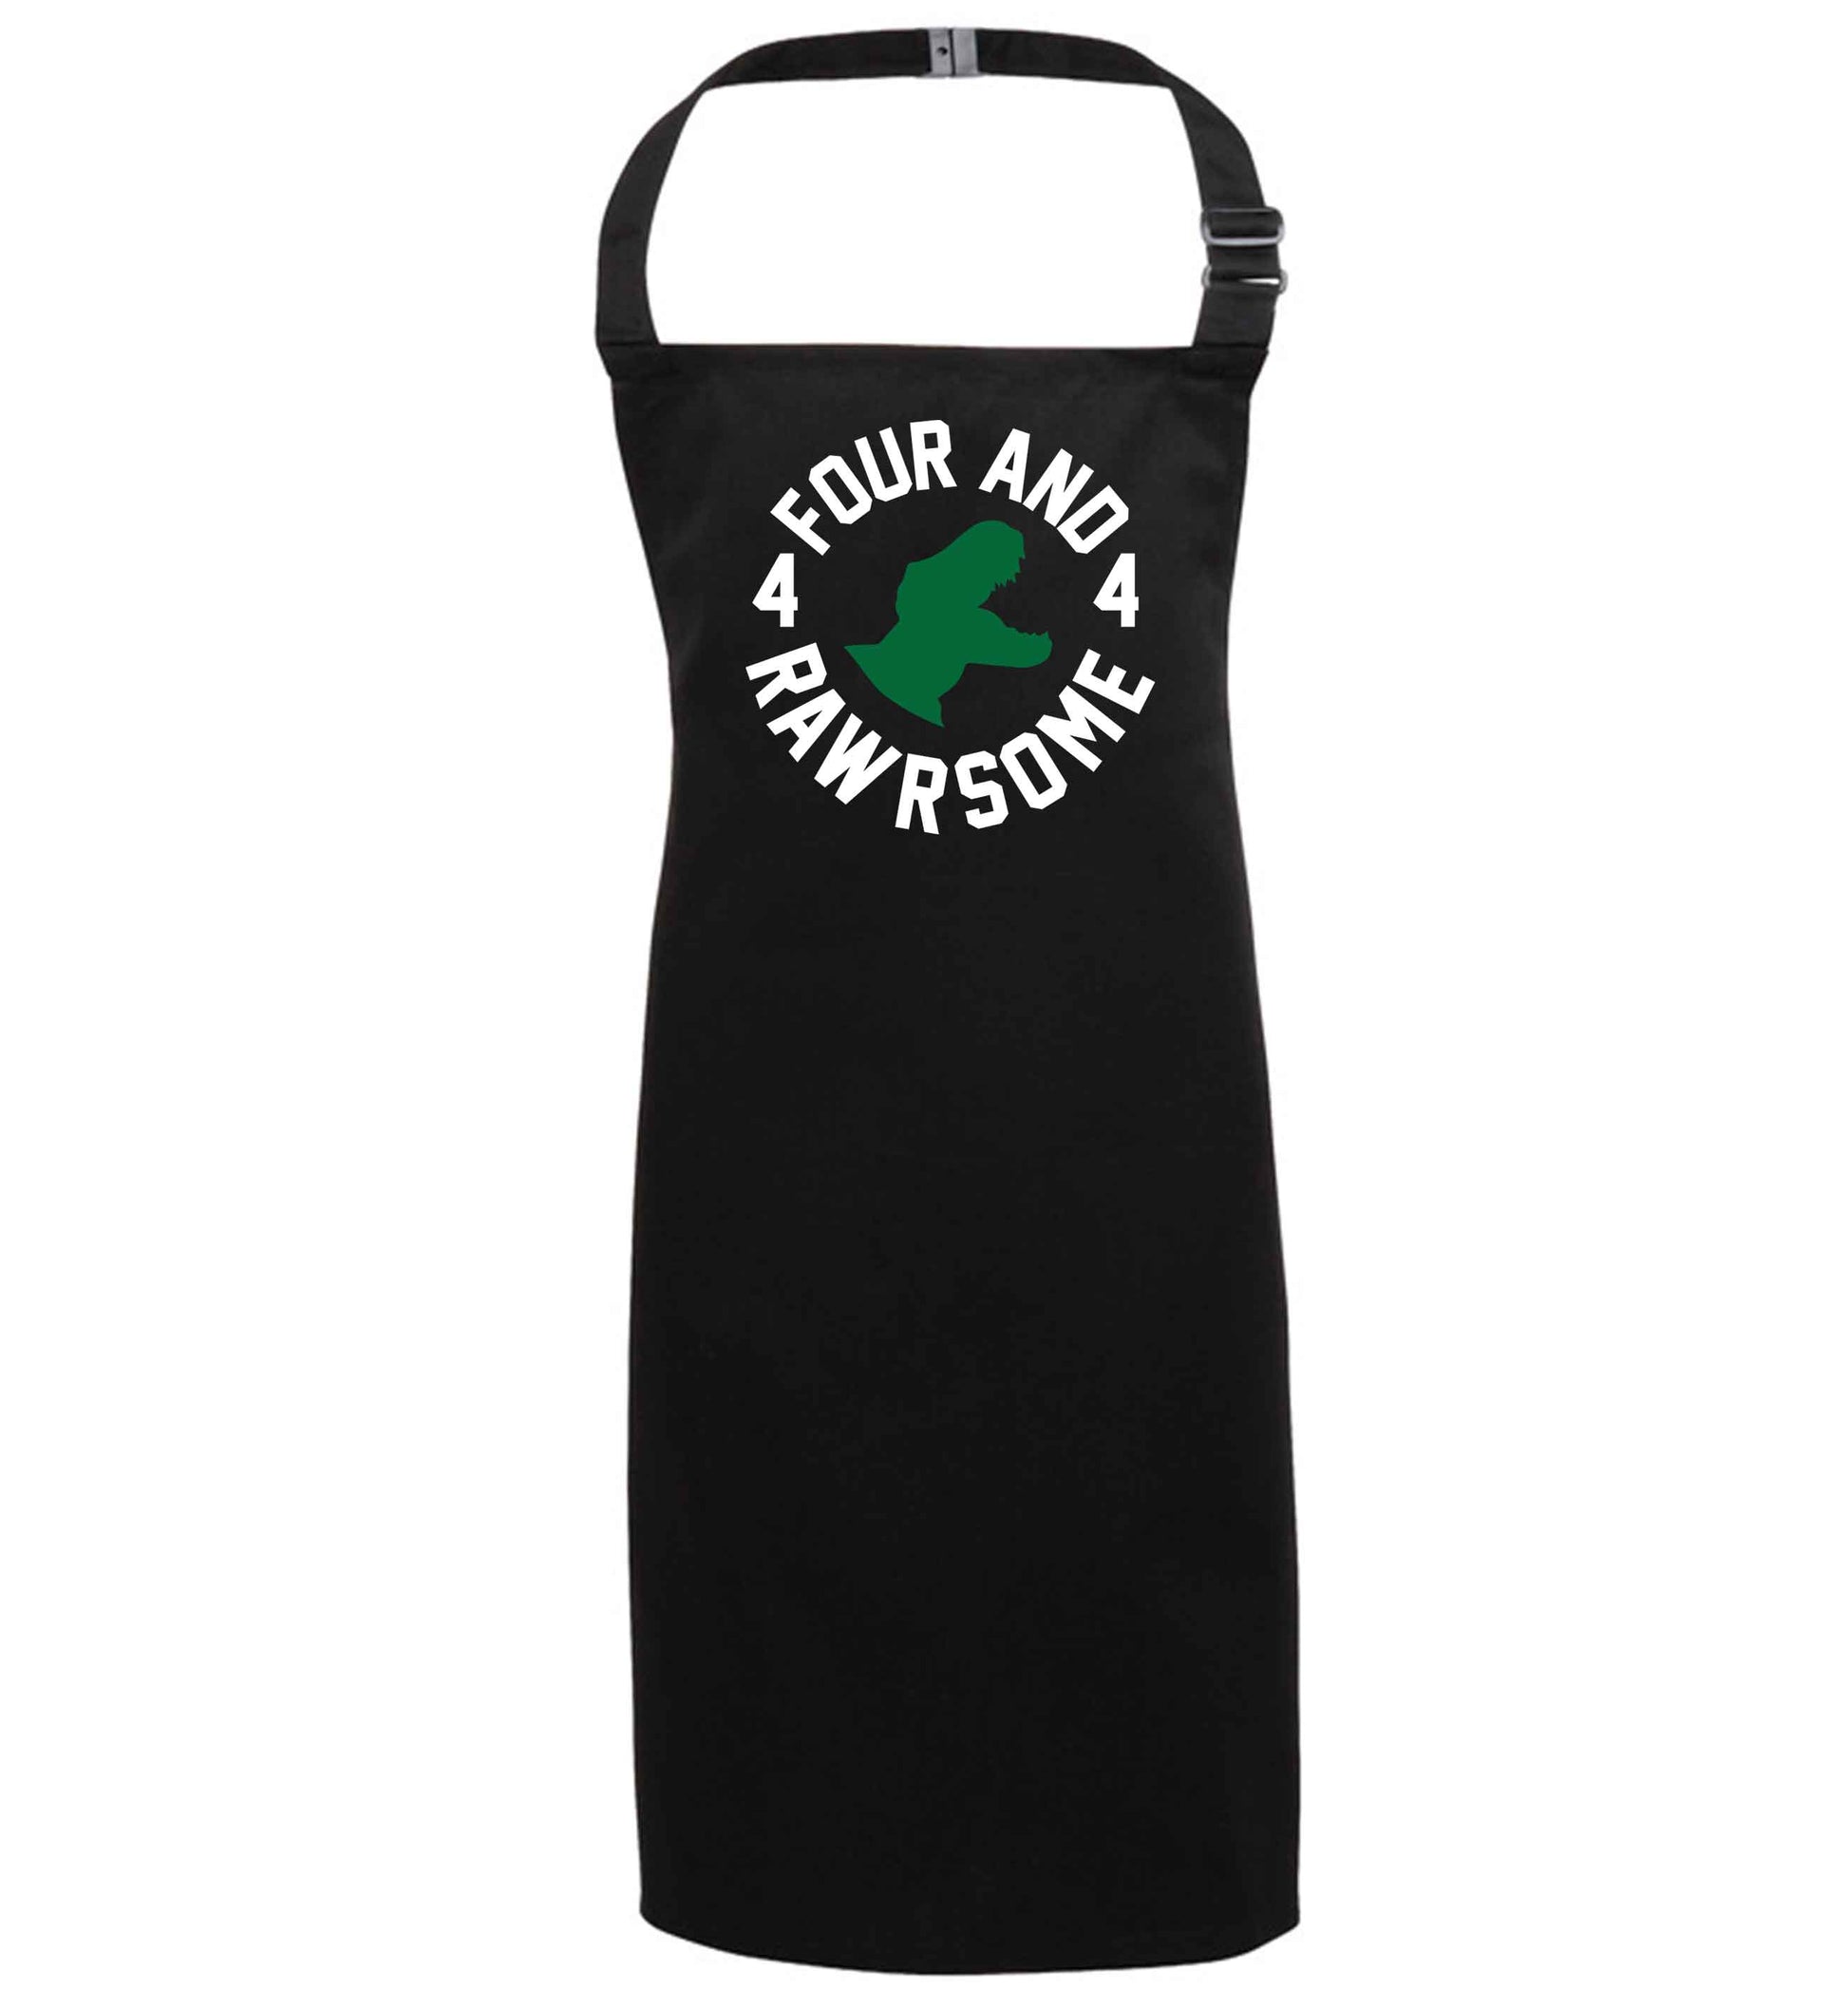 Four and rawrsome black apron 7-10 years